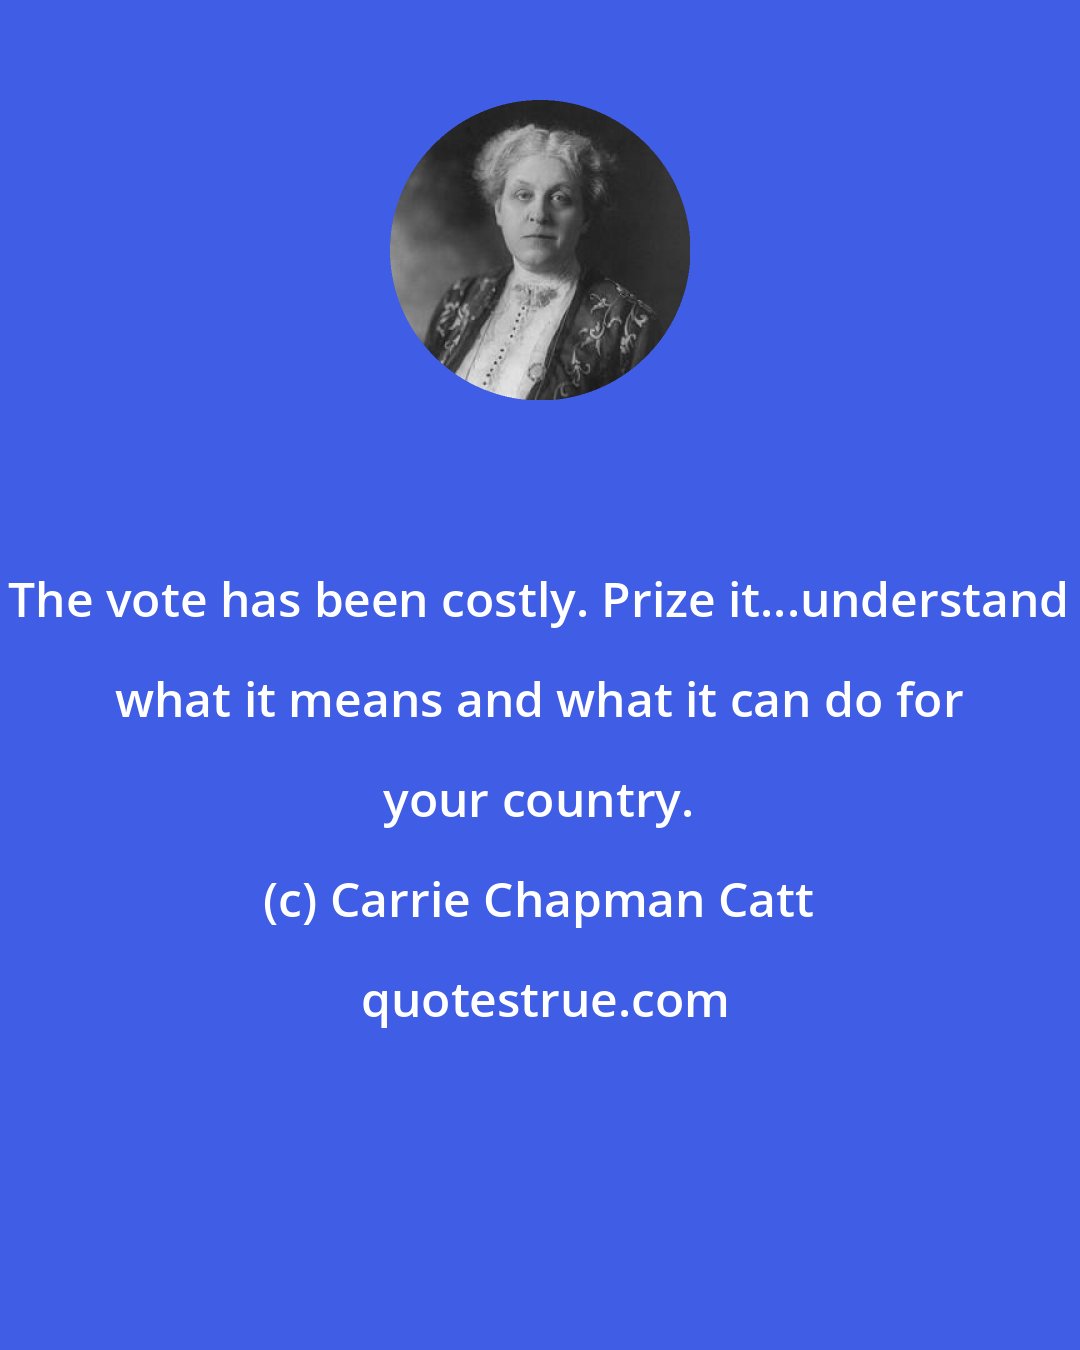 Carrie Chapman Catt: The vote has been costly. Prize it...understand what it means and what it can do for your country.